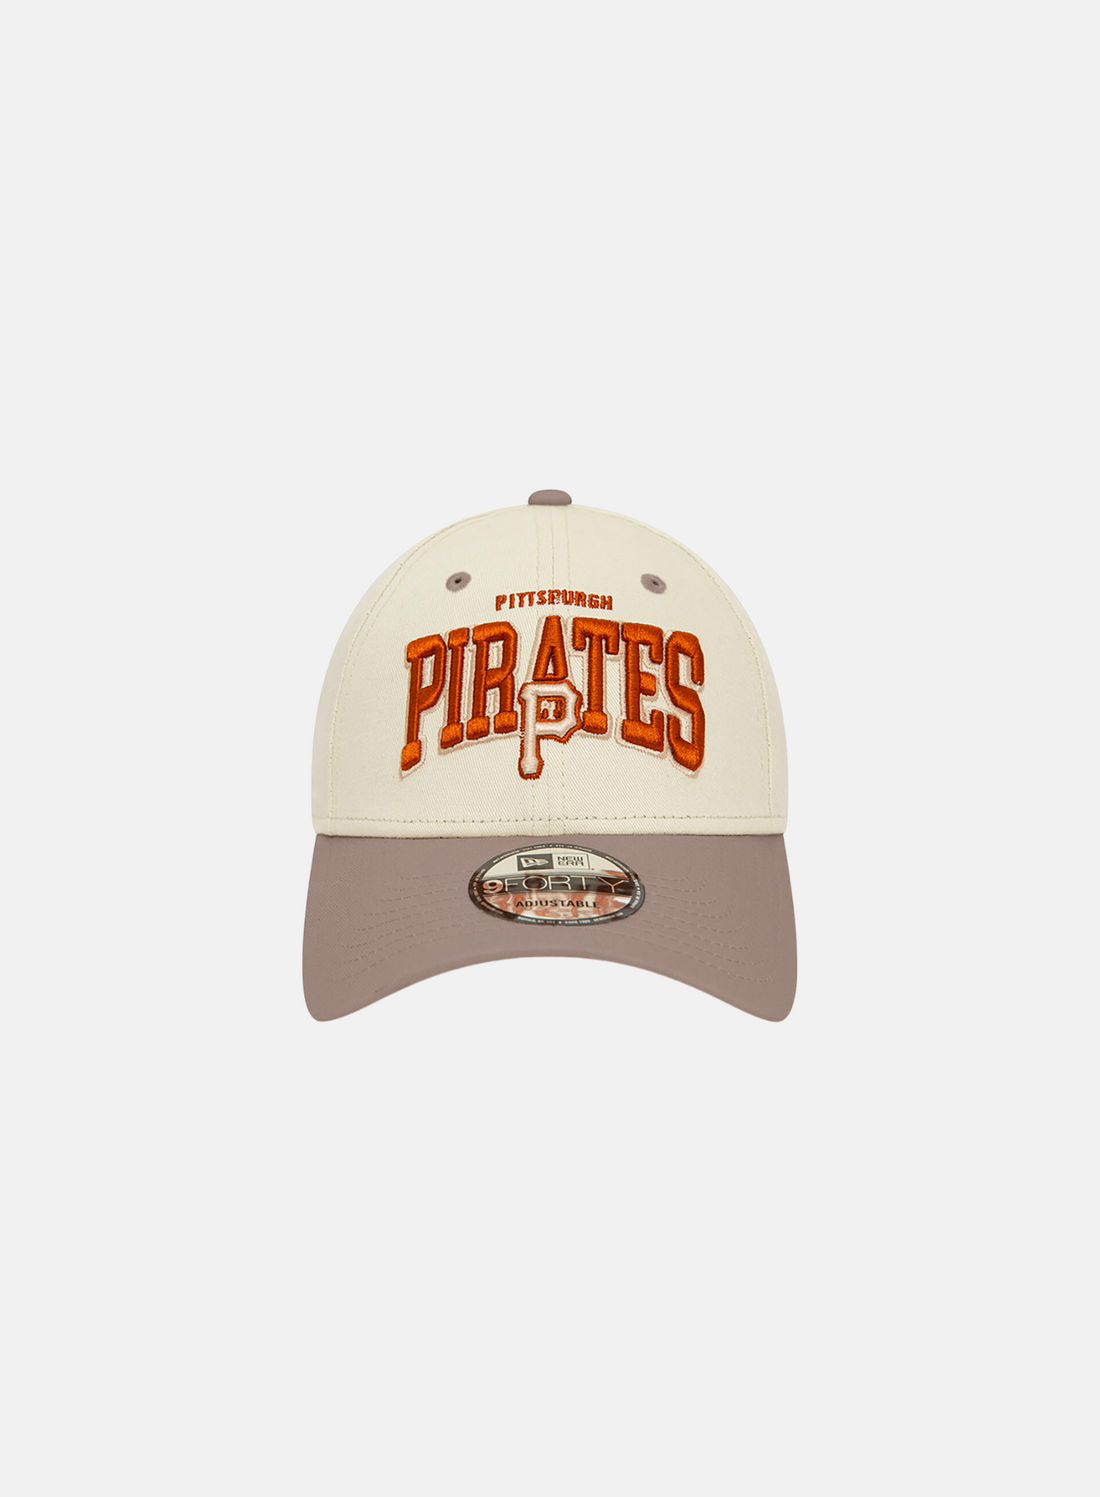 New Era Pittsburgh Pirates White Crown Ivory 9FORTY Adjustable Cap - Hympala Store 